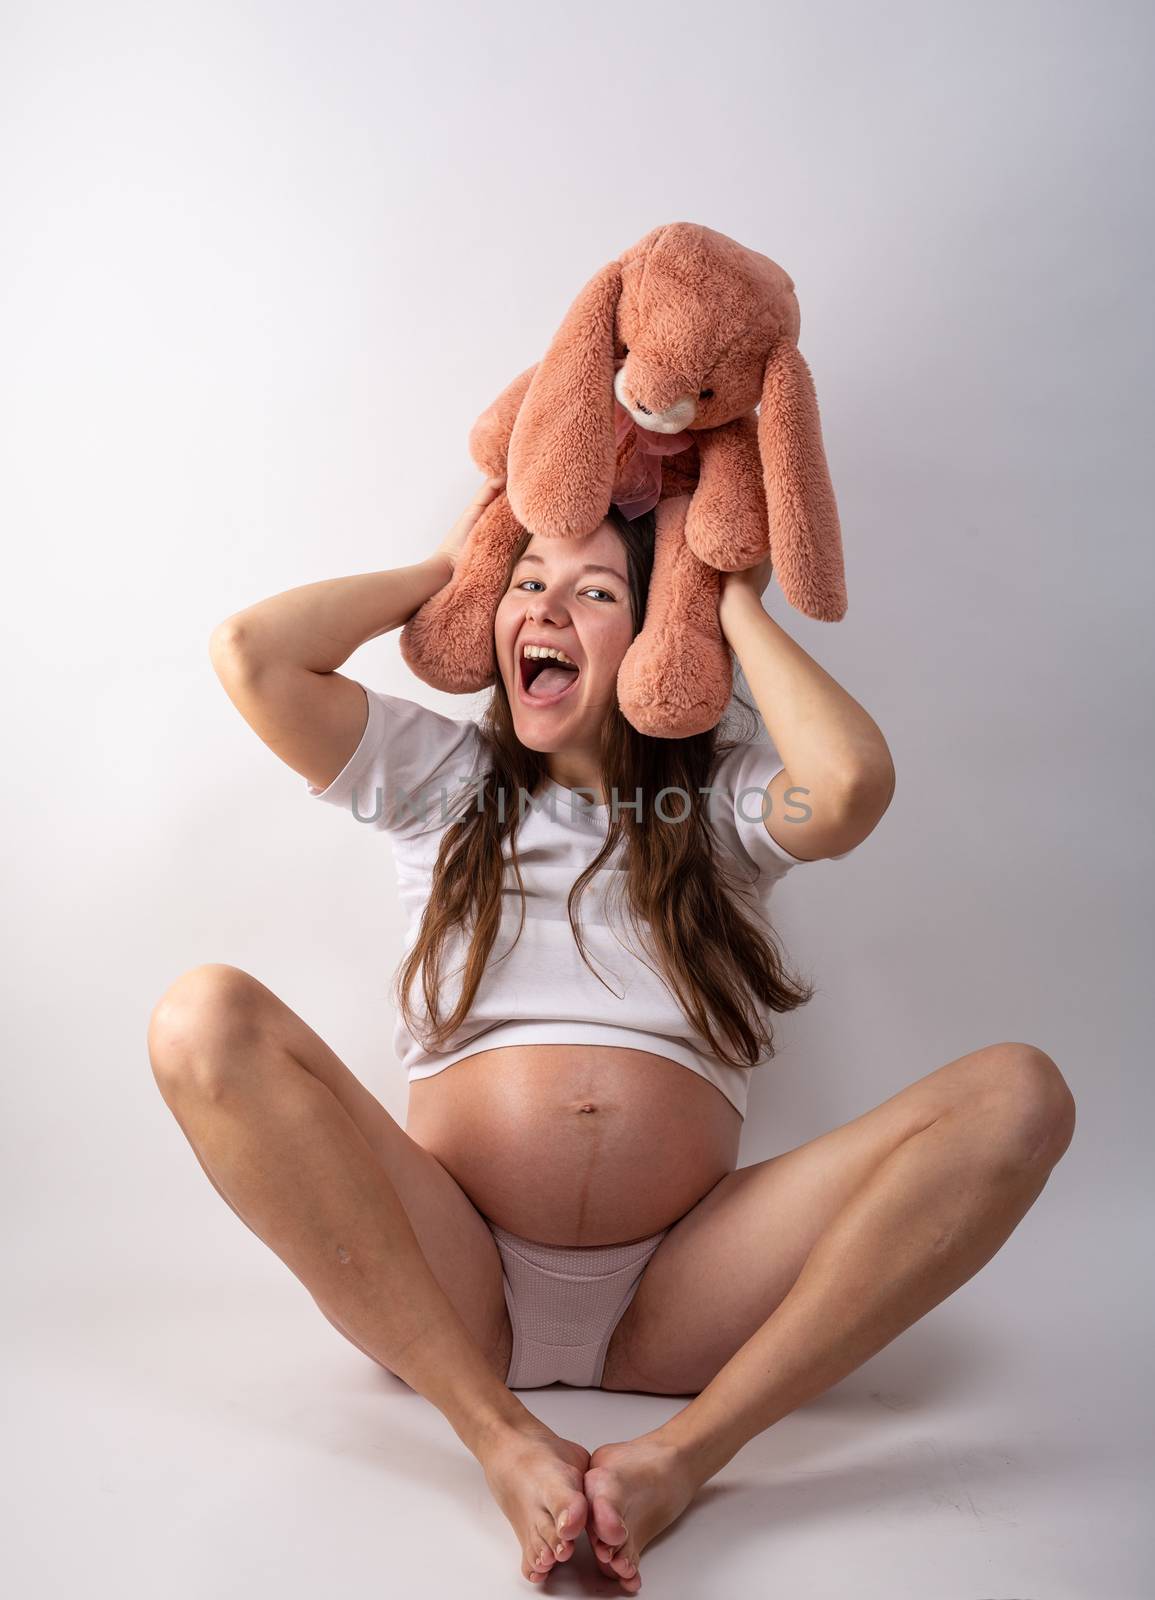 Close-up pregnant woman's belly with Hare toy. Beautiful pregnant woman. Pregnancy, parenthood, preparation and expectation concept